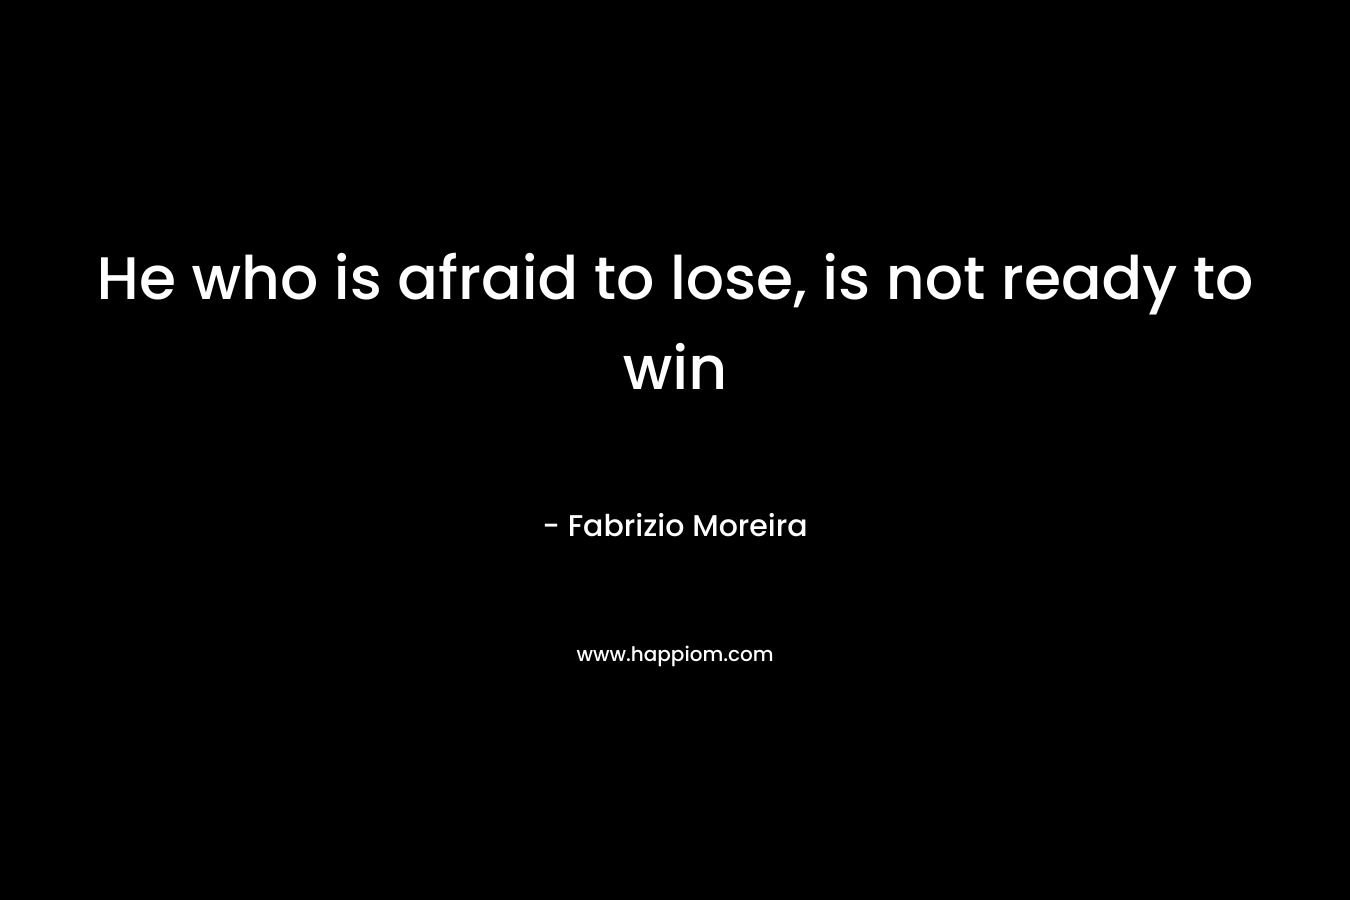 He who is afraid to lose, is not ready to win – Fabrizio Moreira